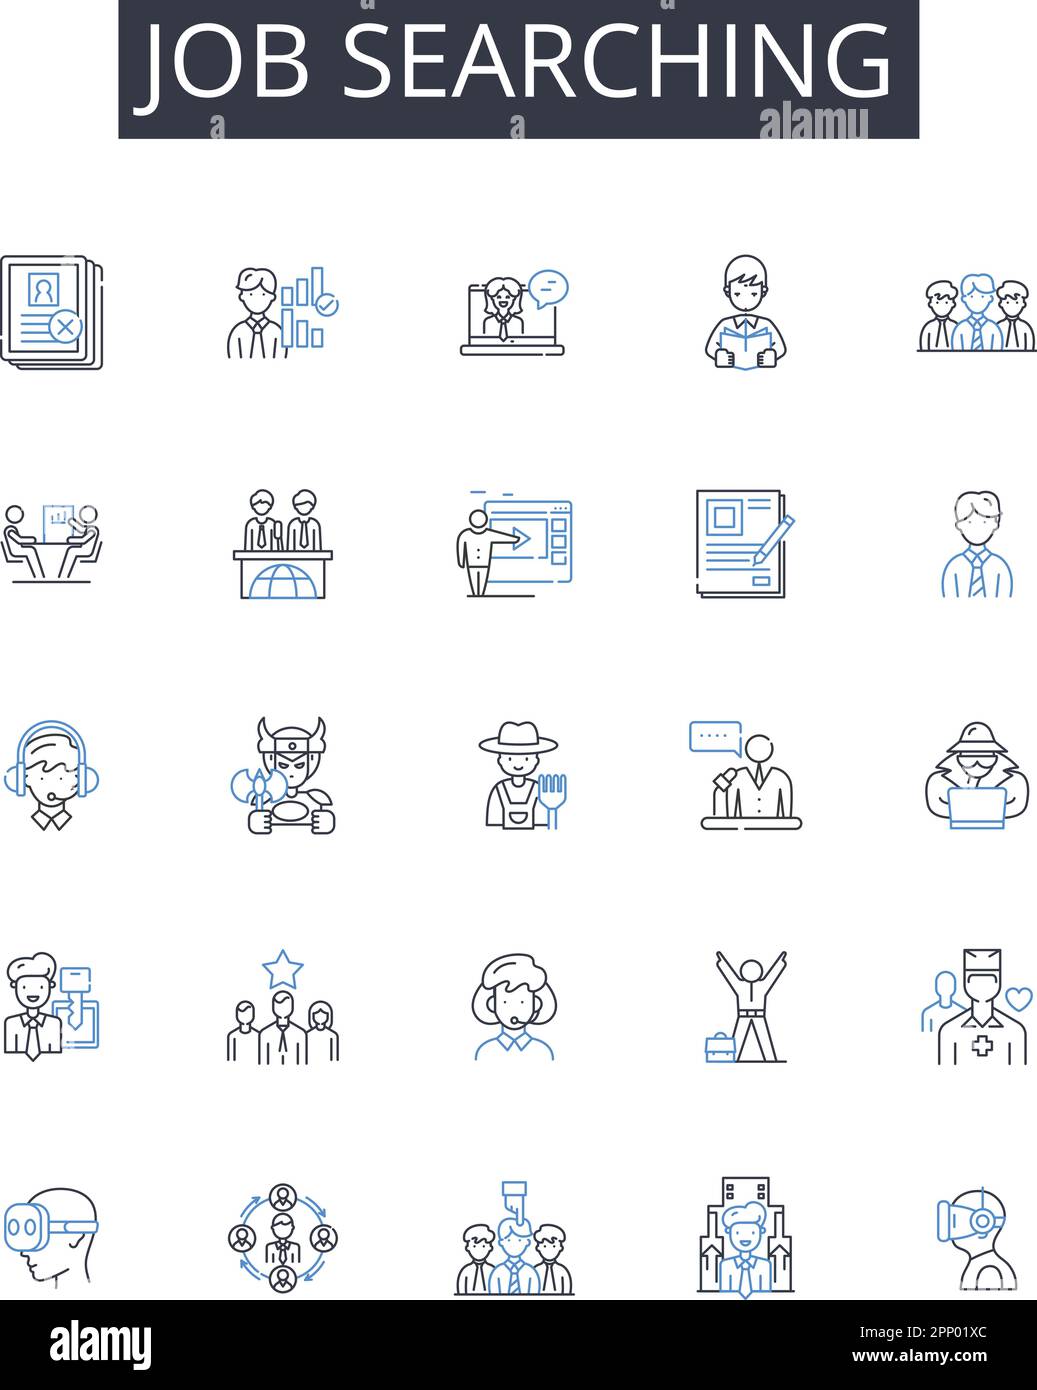 Job searching line icons collection. Double-entry, GAAP, Accrual, Depreciation, Amortization, Cost accounting, Income statement vector and linear Stock Vector